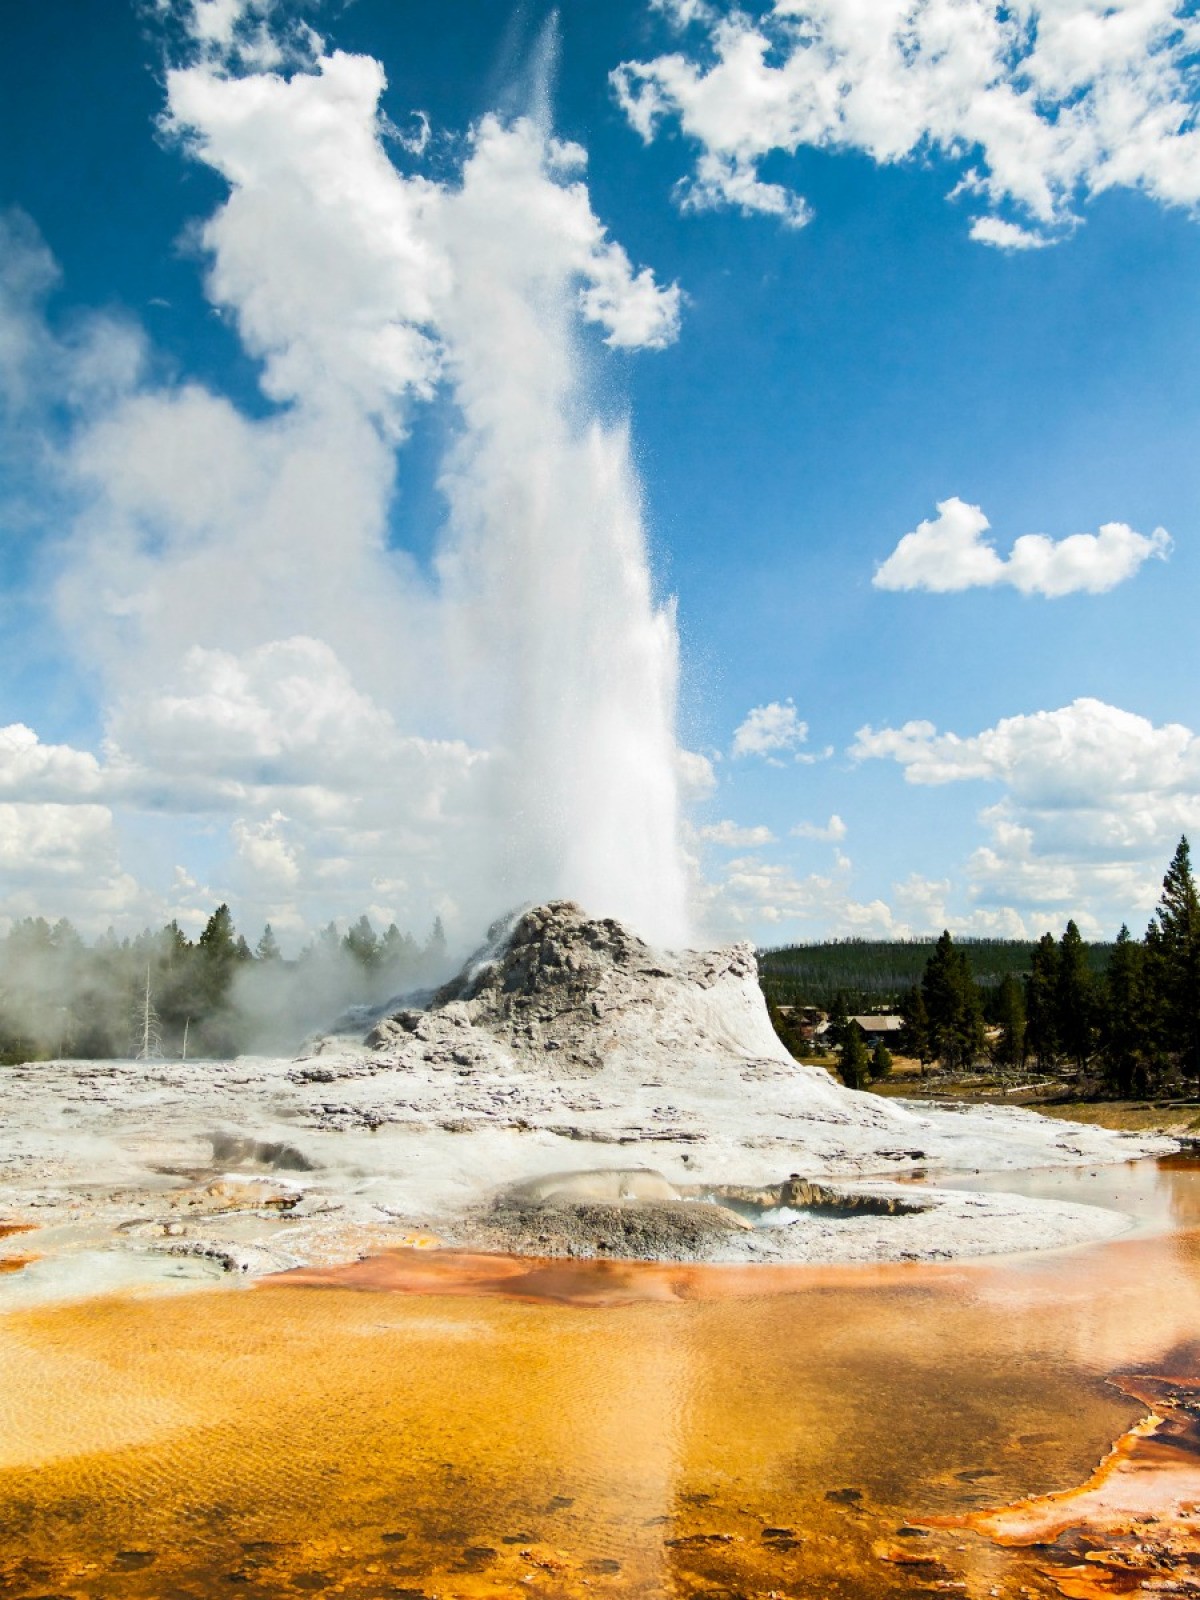 Yellowstone National Park Photos and Information | ThriftyFun